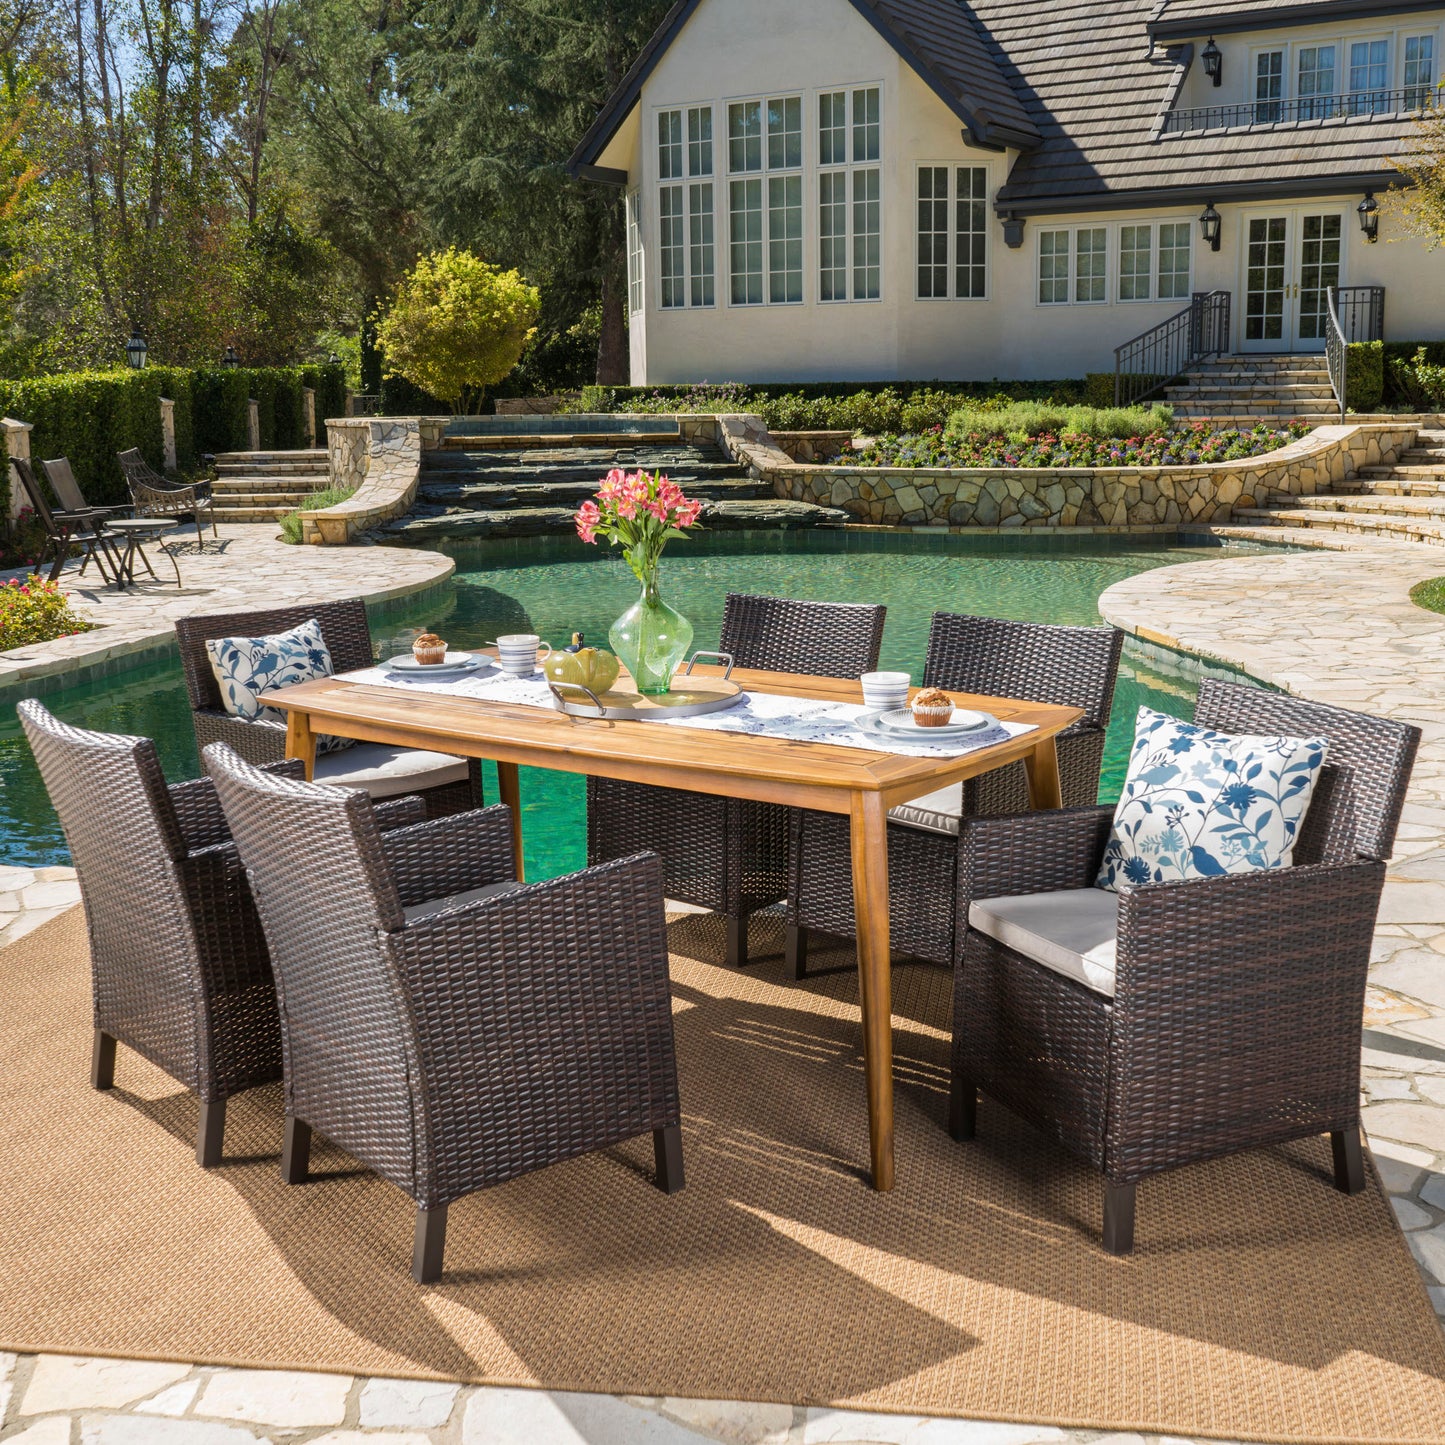 Reeves Outdoor 7 Piece Wicker Dining Set with Acacia Wood Table